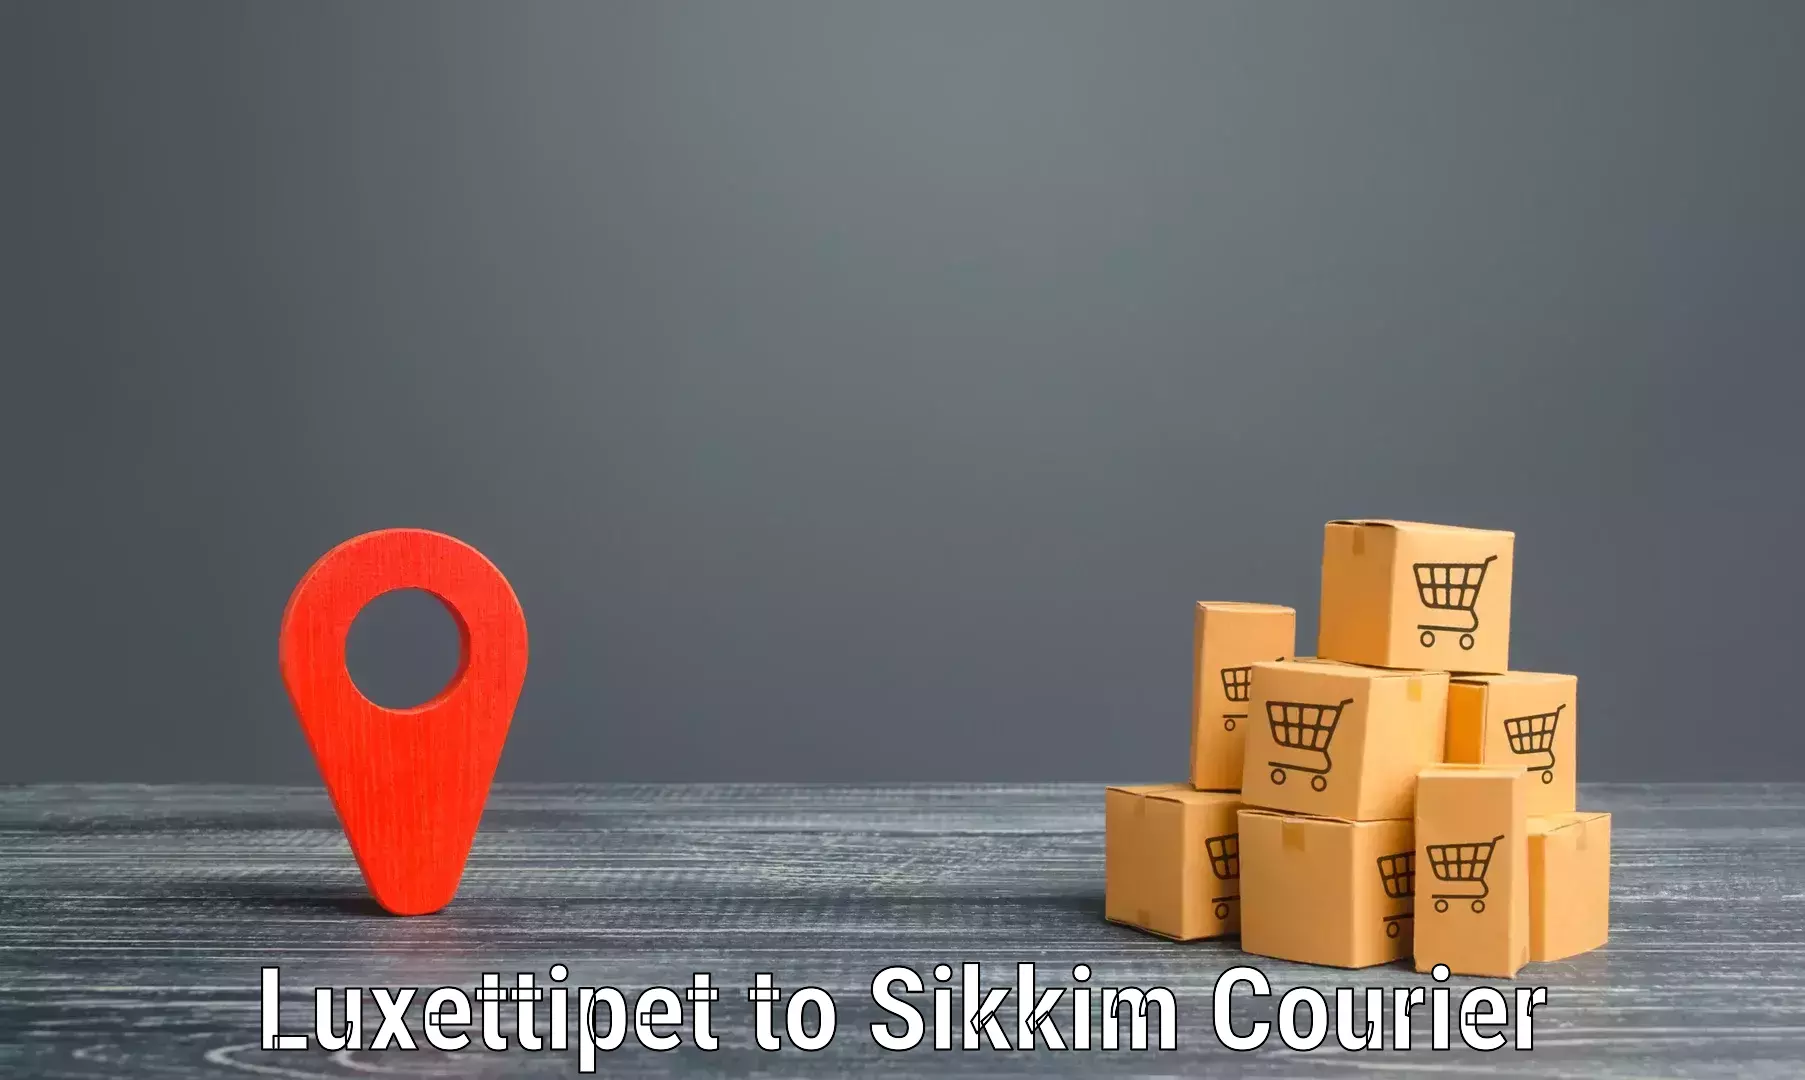 Nationwide shipping coverage Luxettipet to North Sikkim